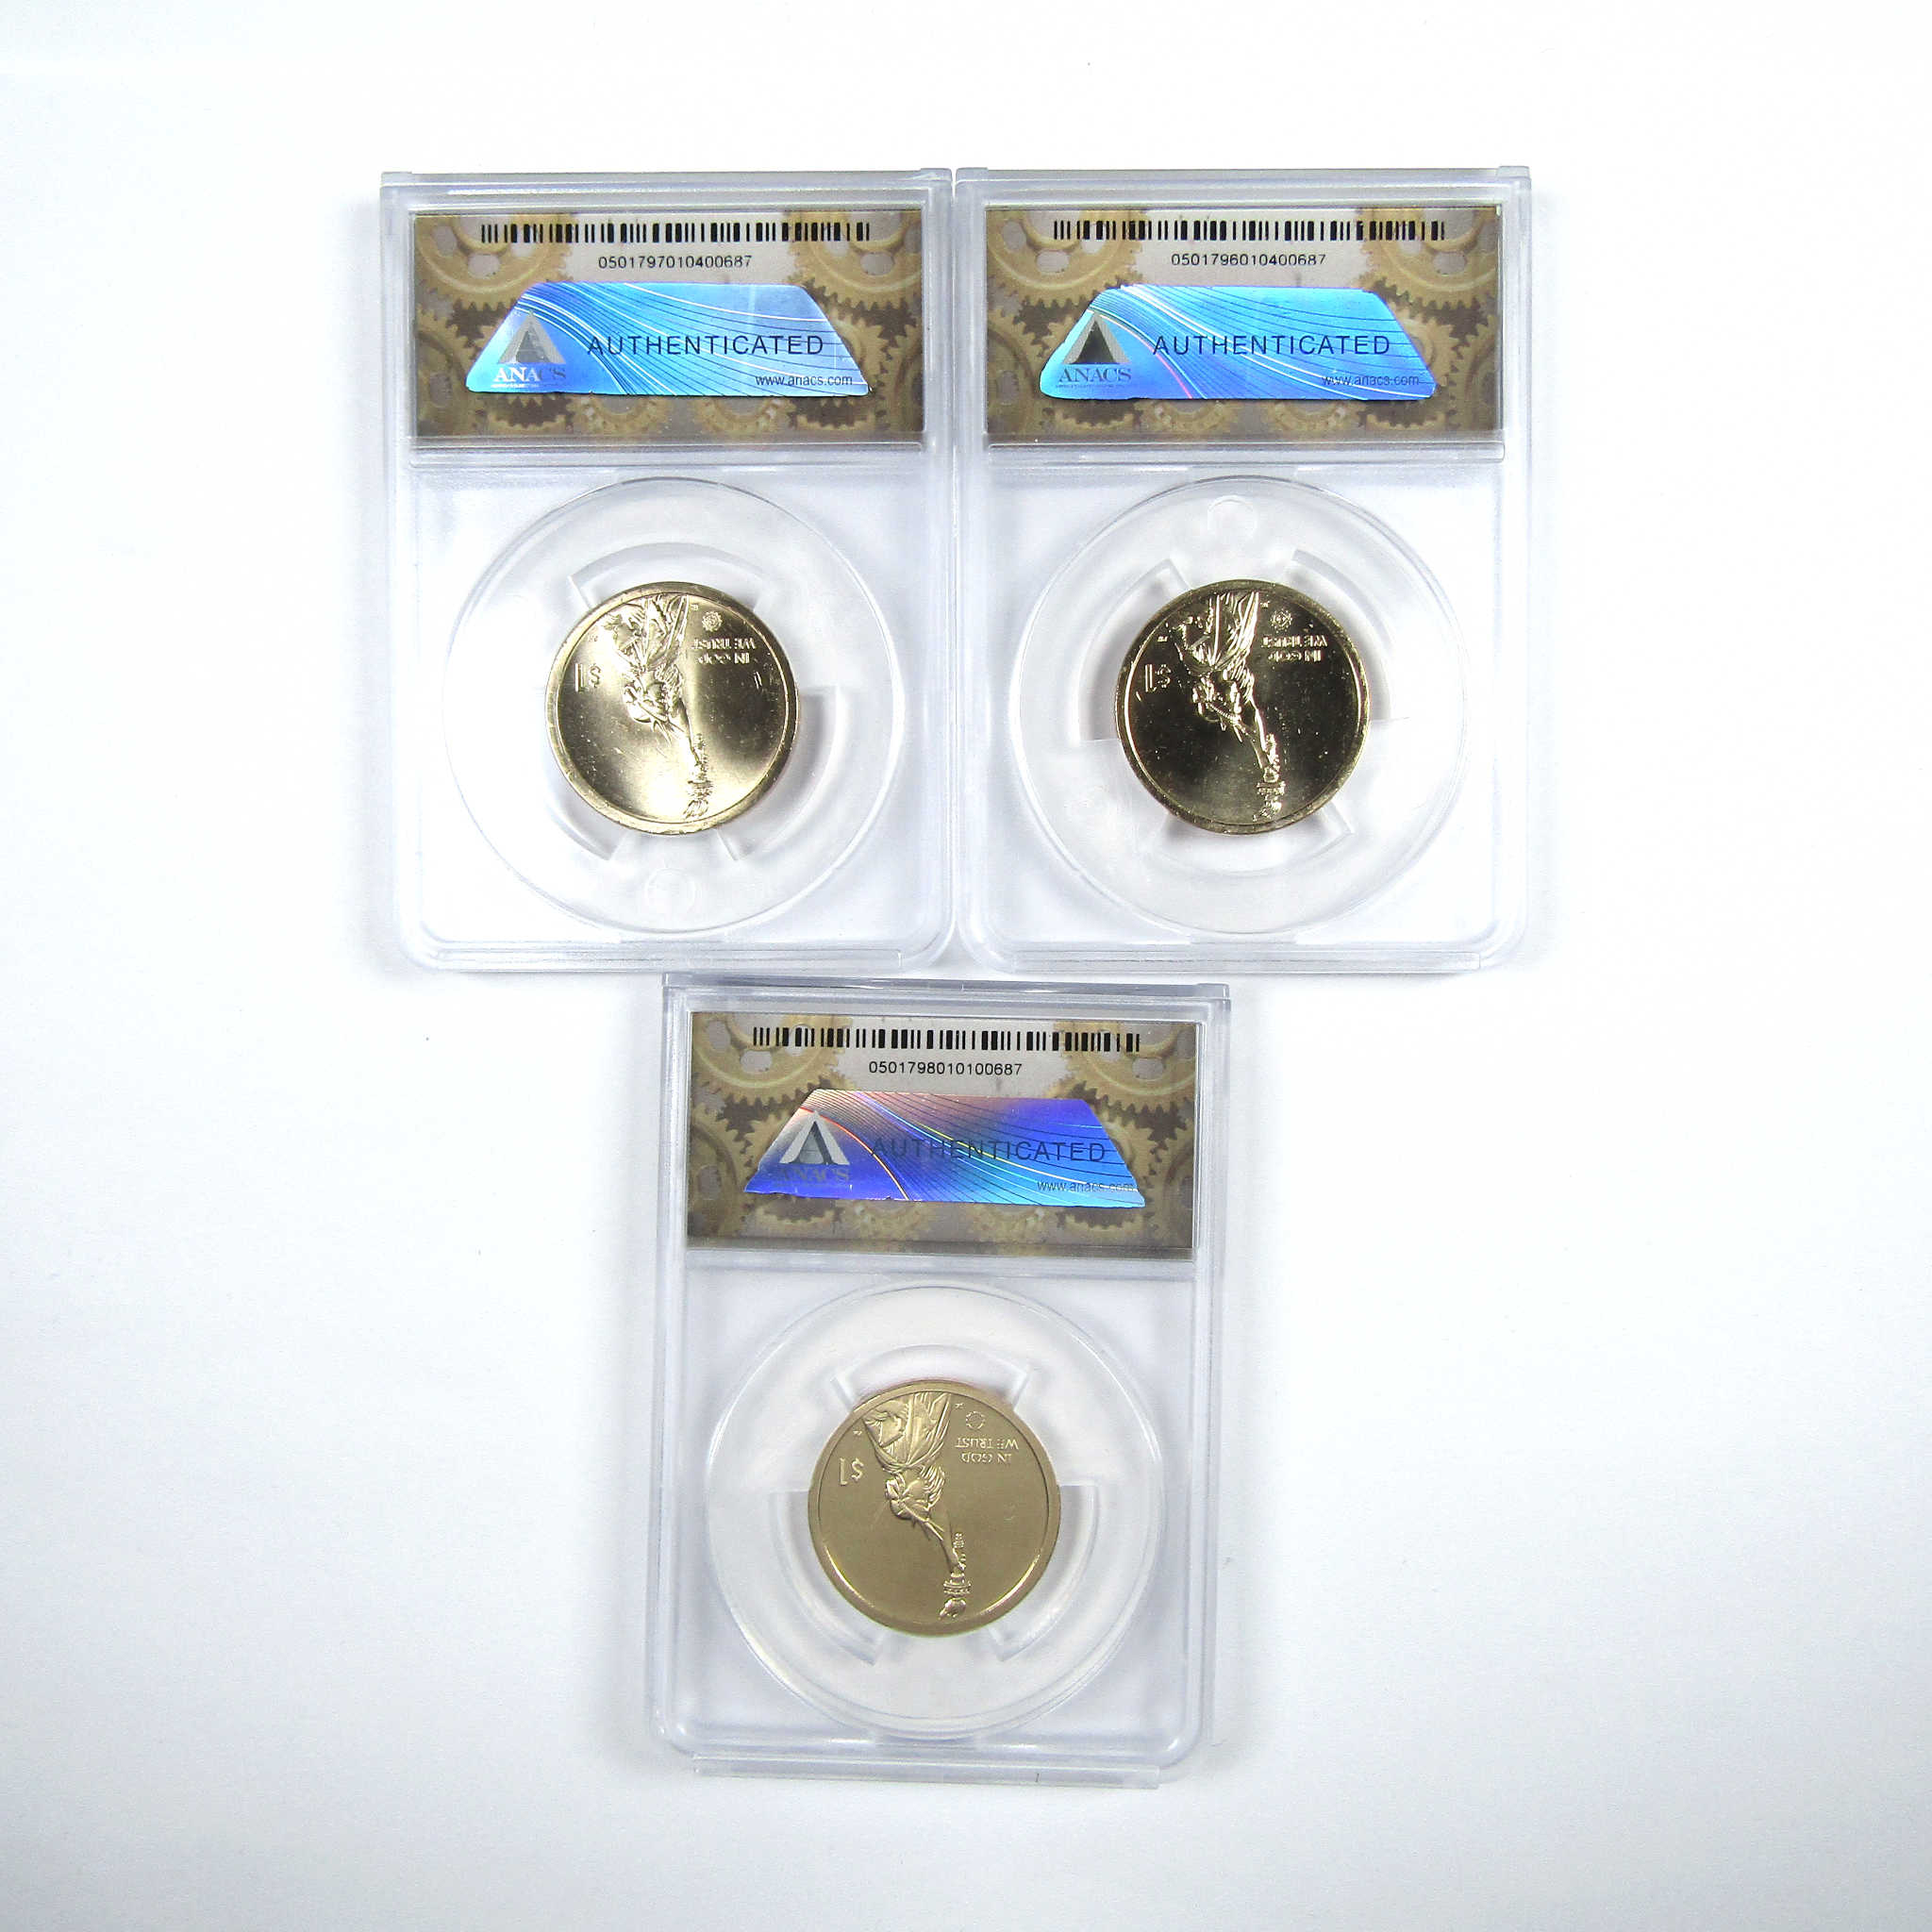 2019 PDS Classifying the Stars Innovation 3 Coin Set ANACS SKU:CPC6119